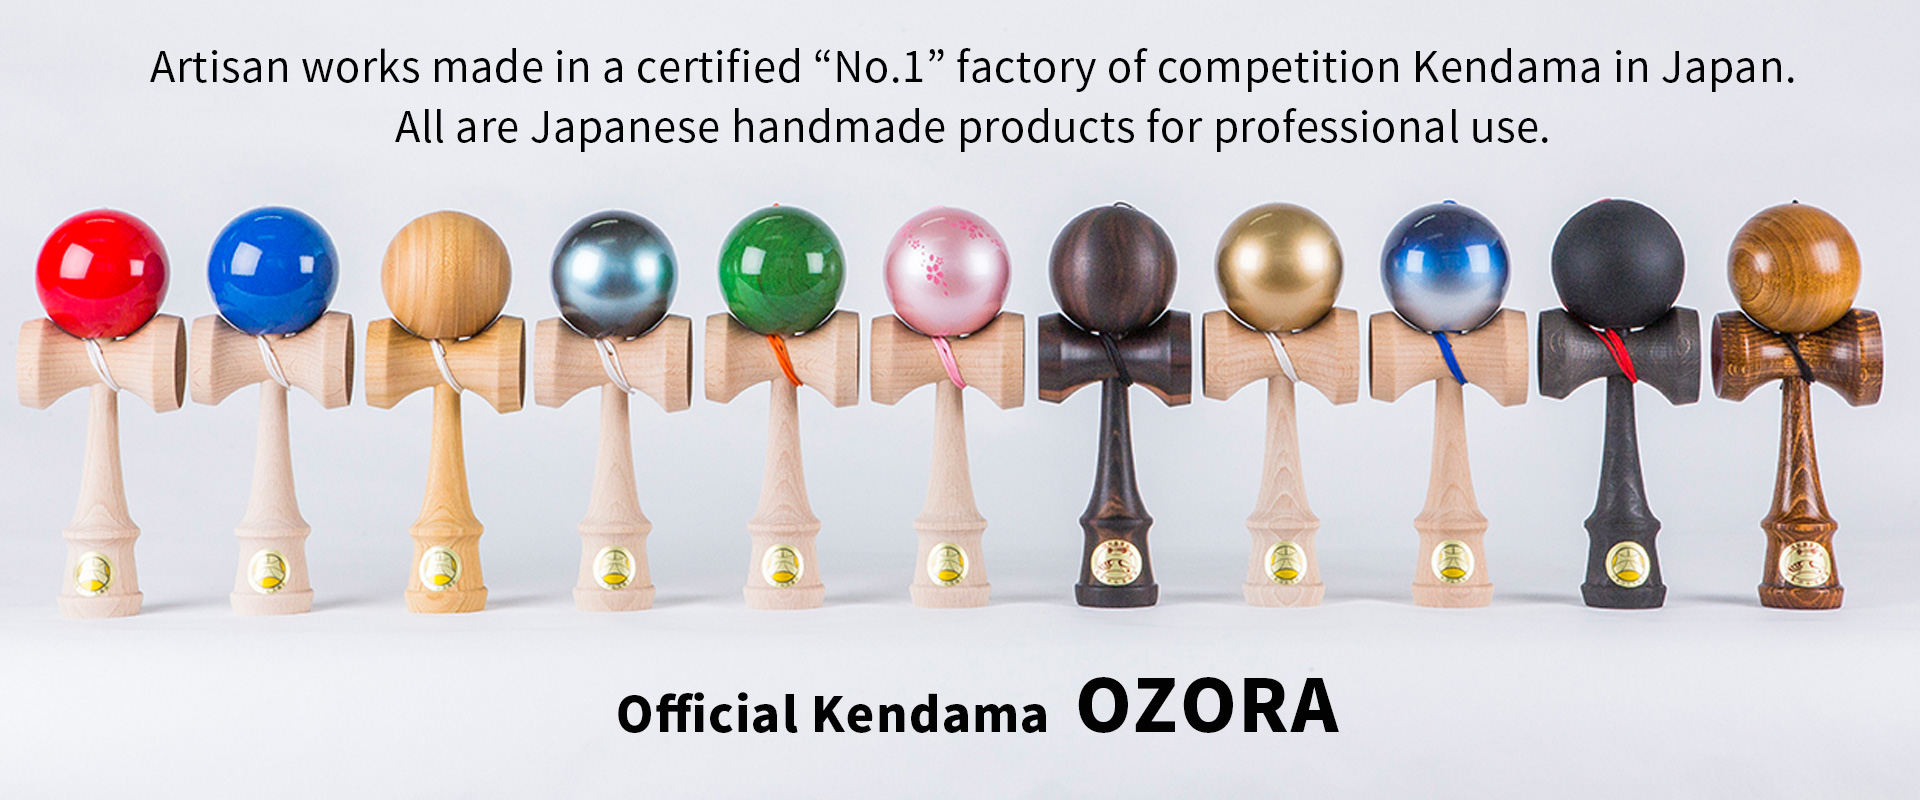 Artisan works made in a certified “No.1” factory of competition Kendama in Japan. All are Japanese handmade products for professional use.